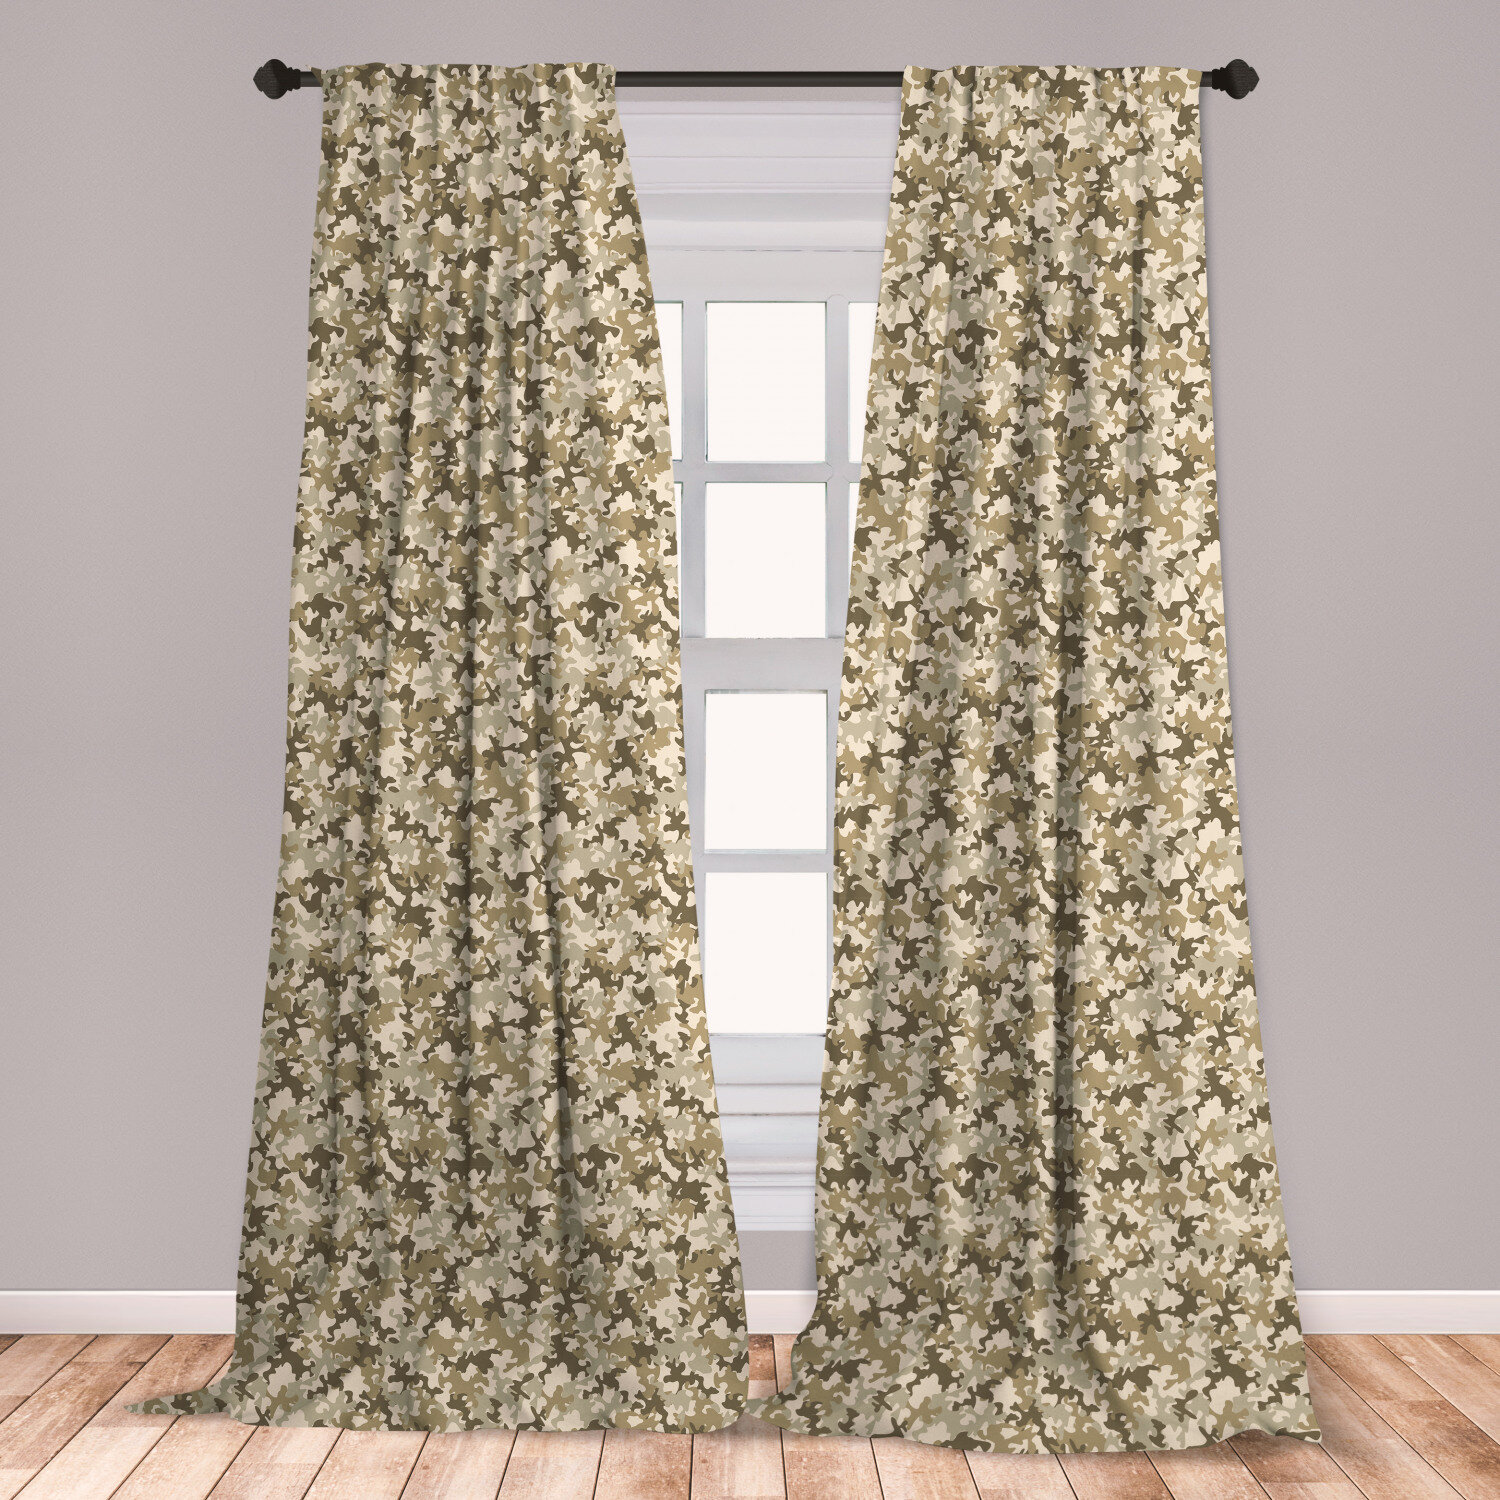 East Urban Home Ambesonne Camouflage Curtains